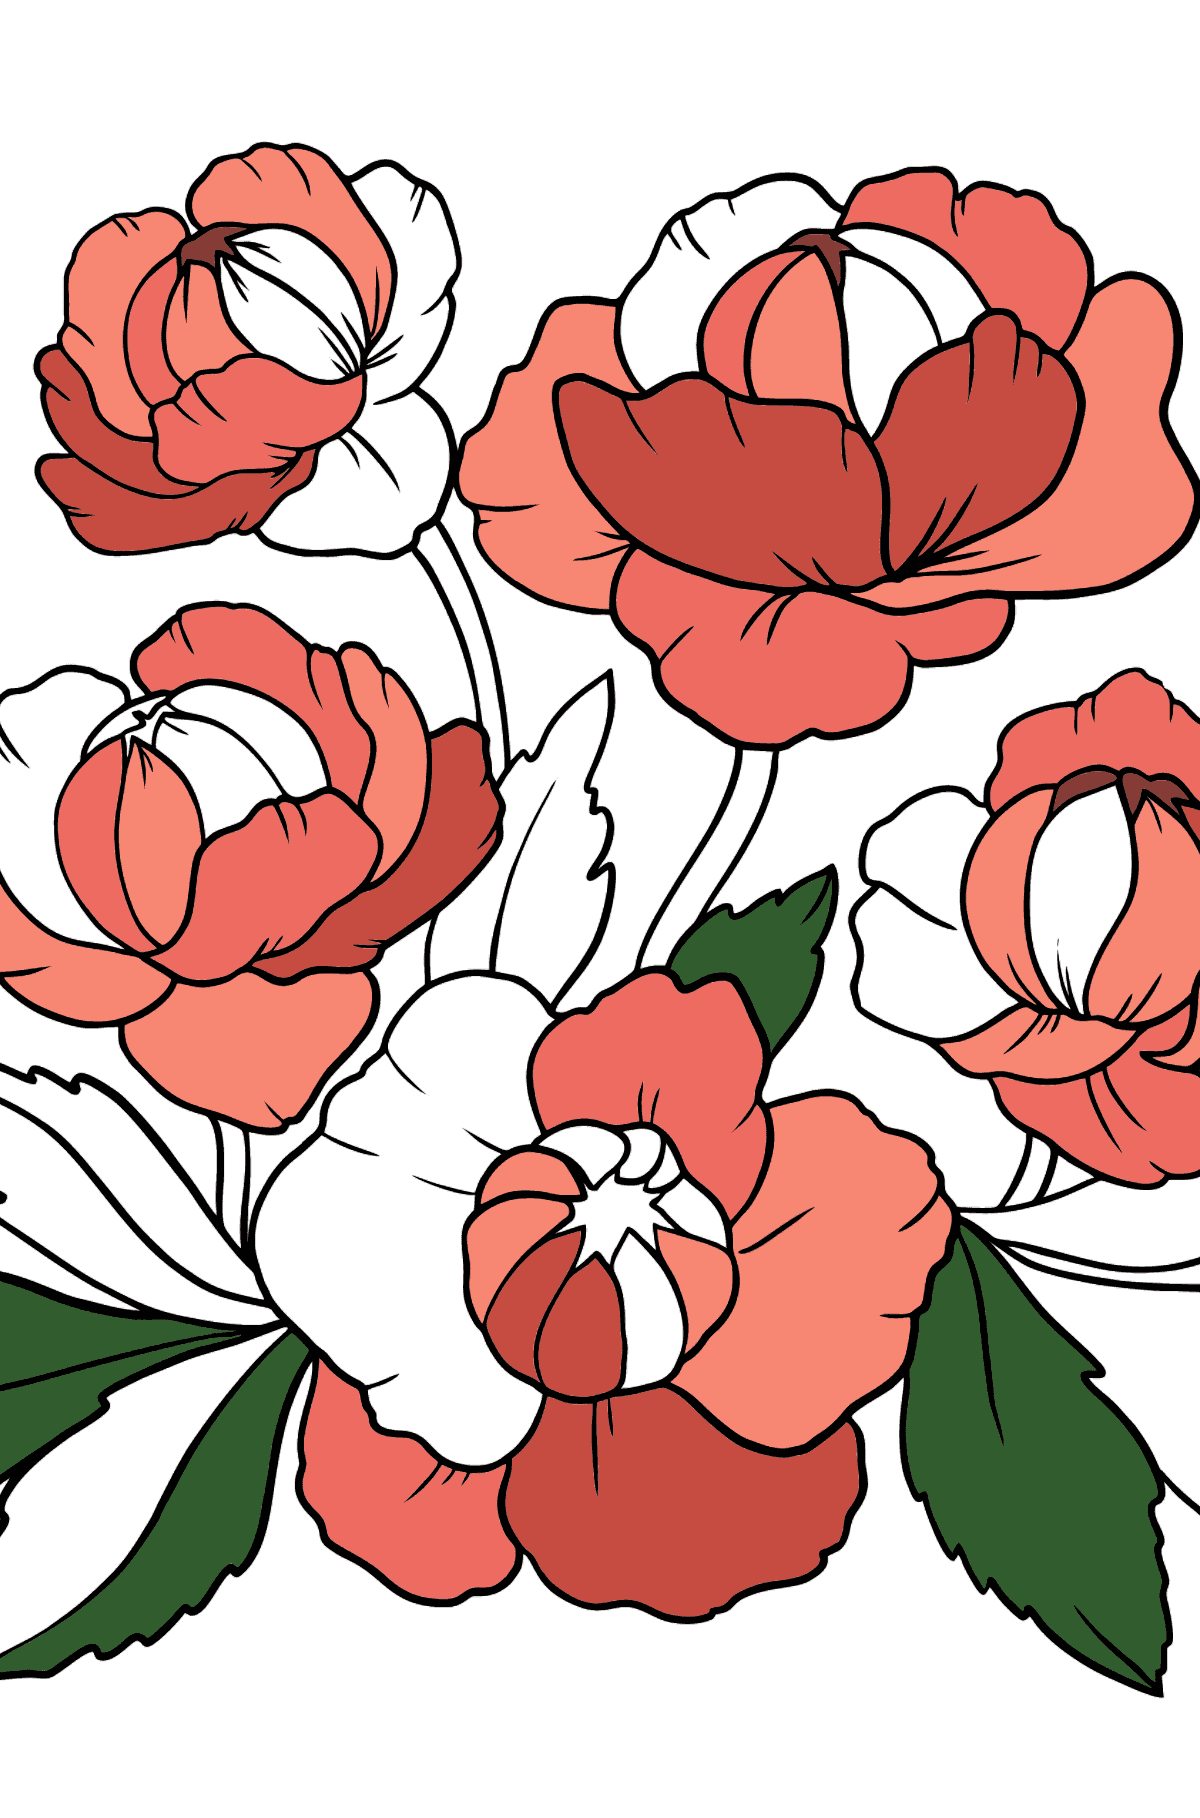 Flower Coloring Page - A Globeflower with Dark Red Petals - Coloring Pages for Kids